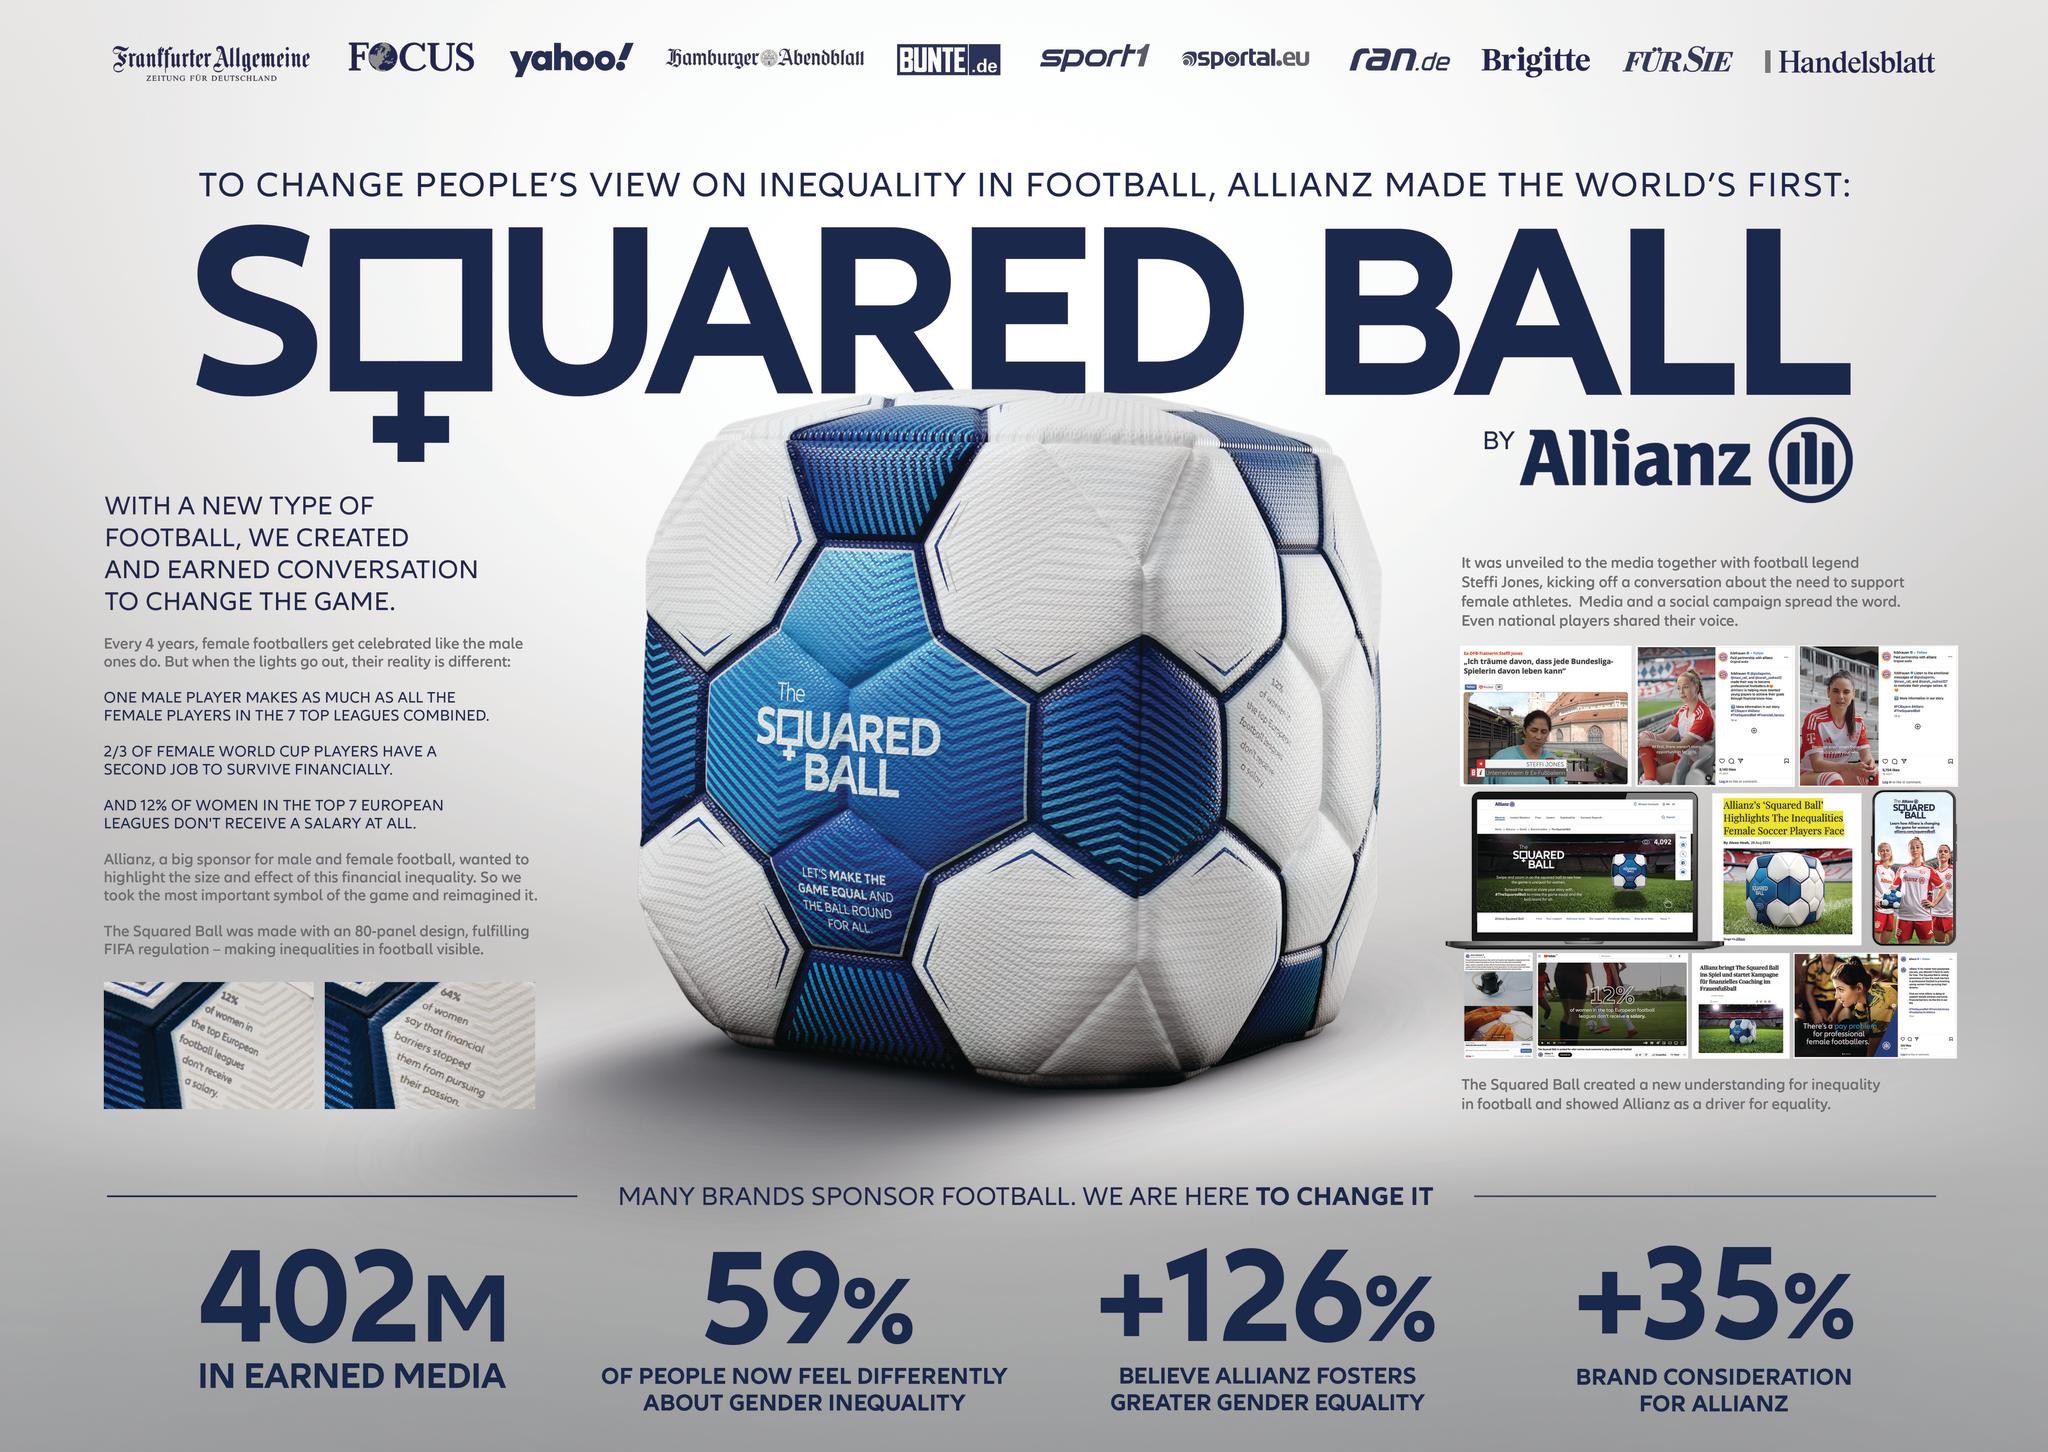 The Squared Ball